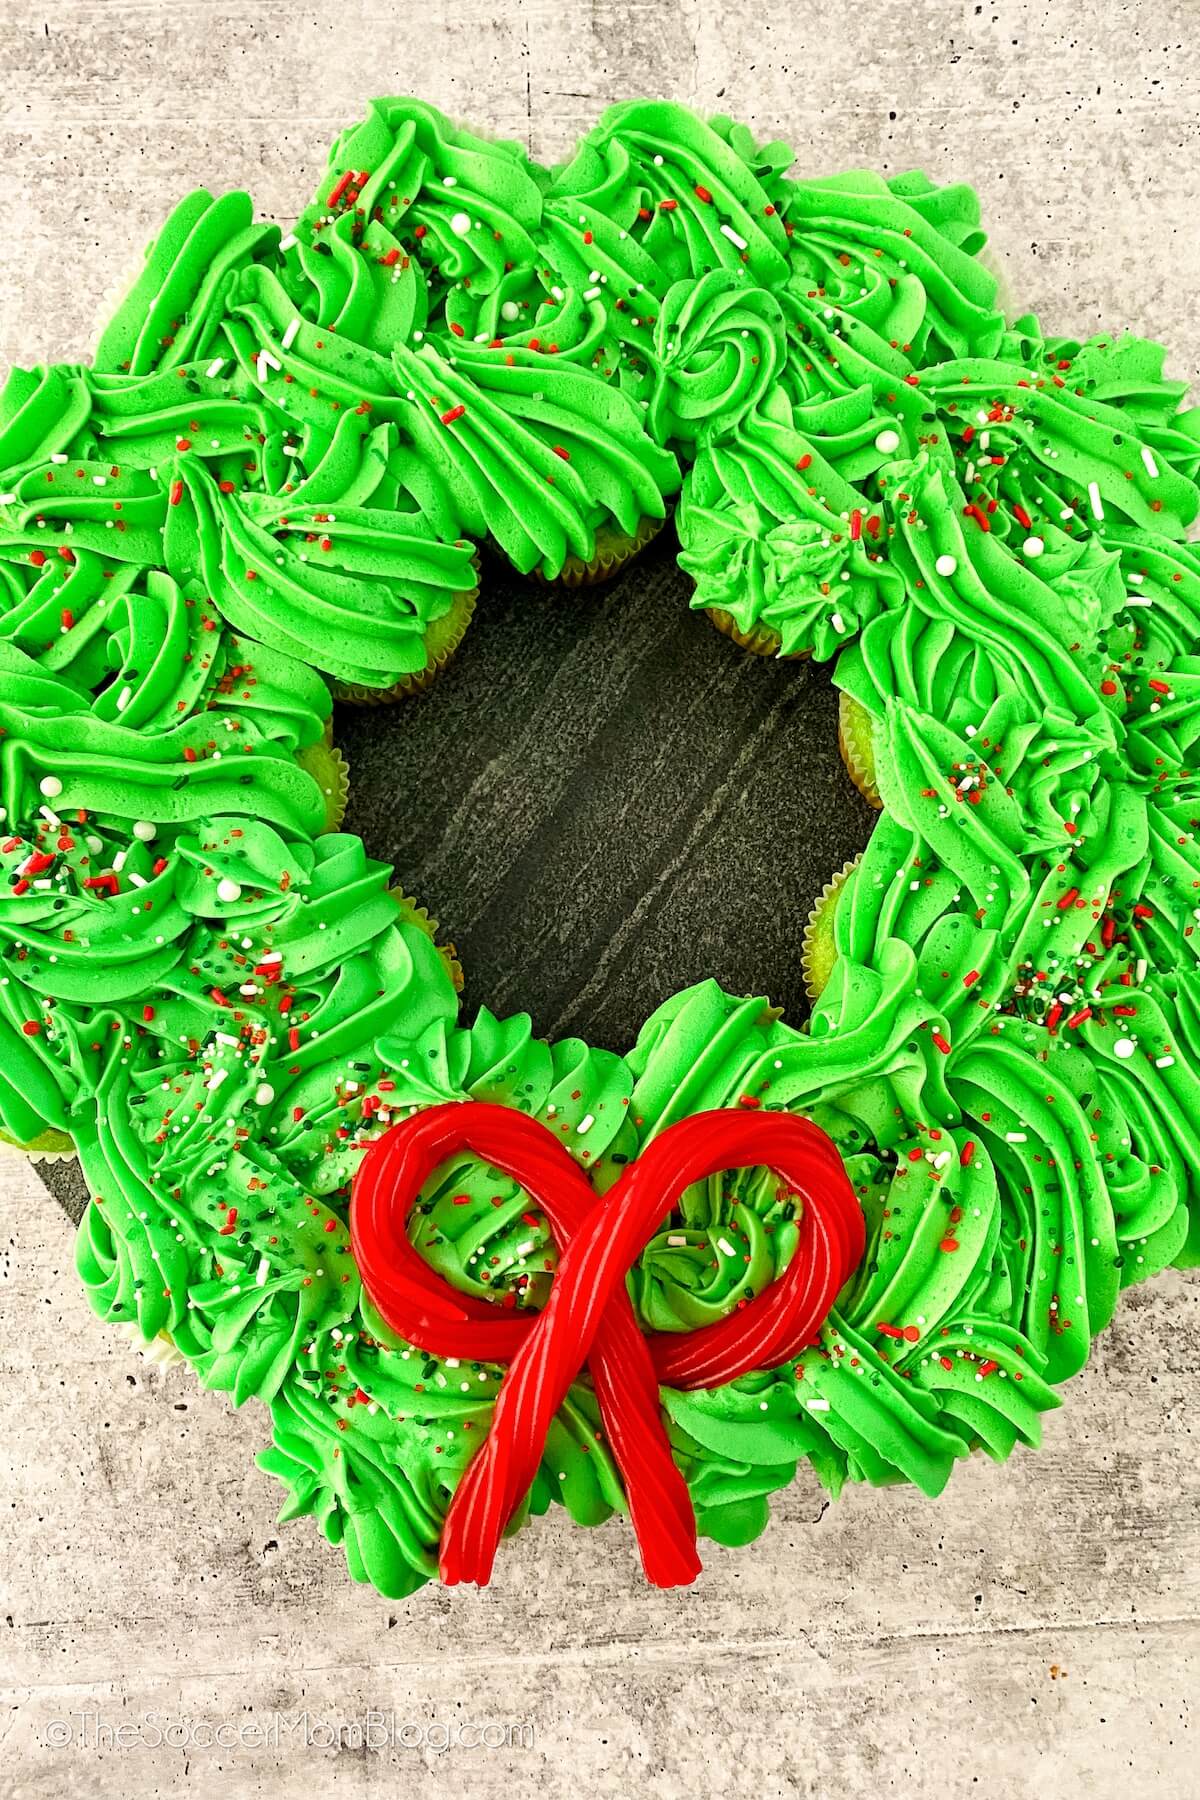 Christmas wreath made of cupcakes arranged in a circle with green frosting and a candy bow.